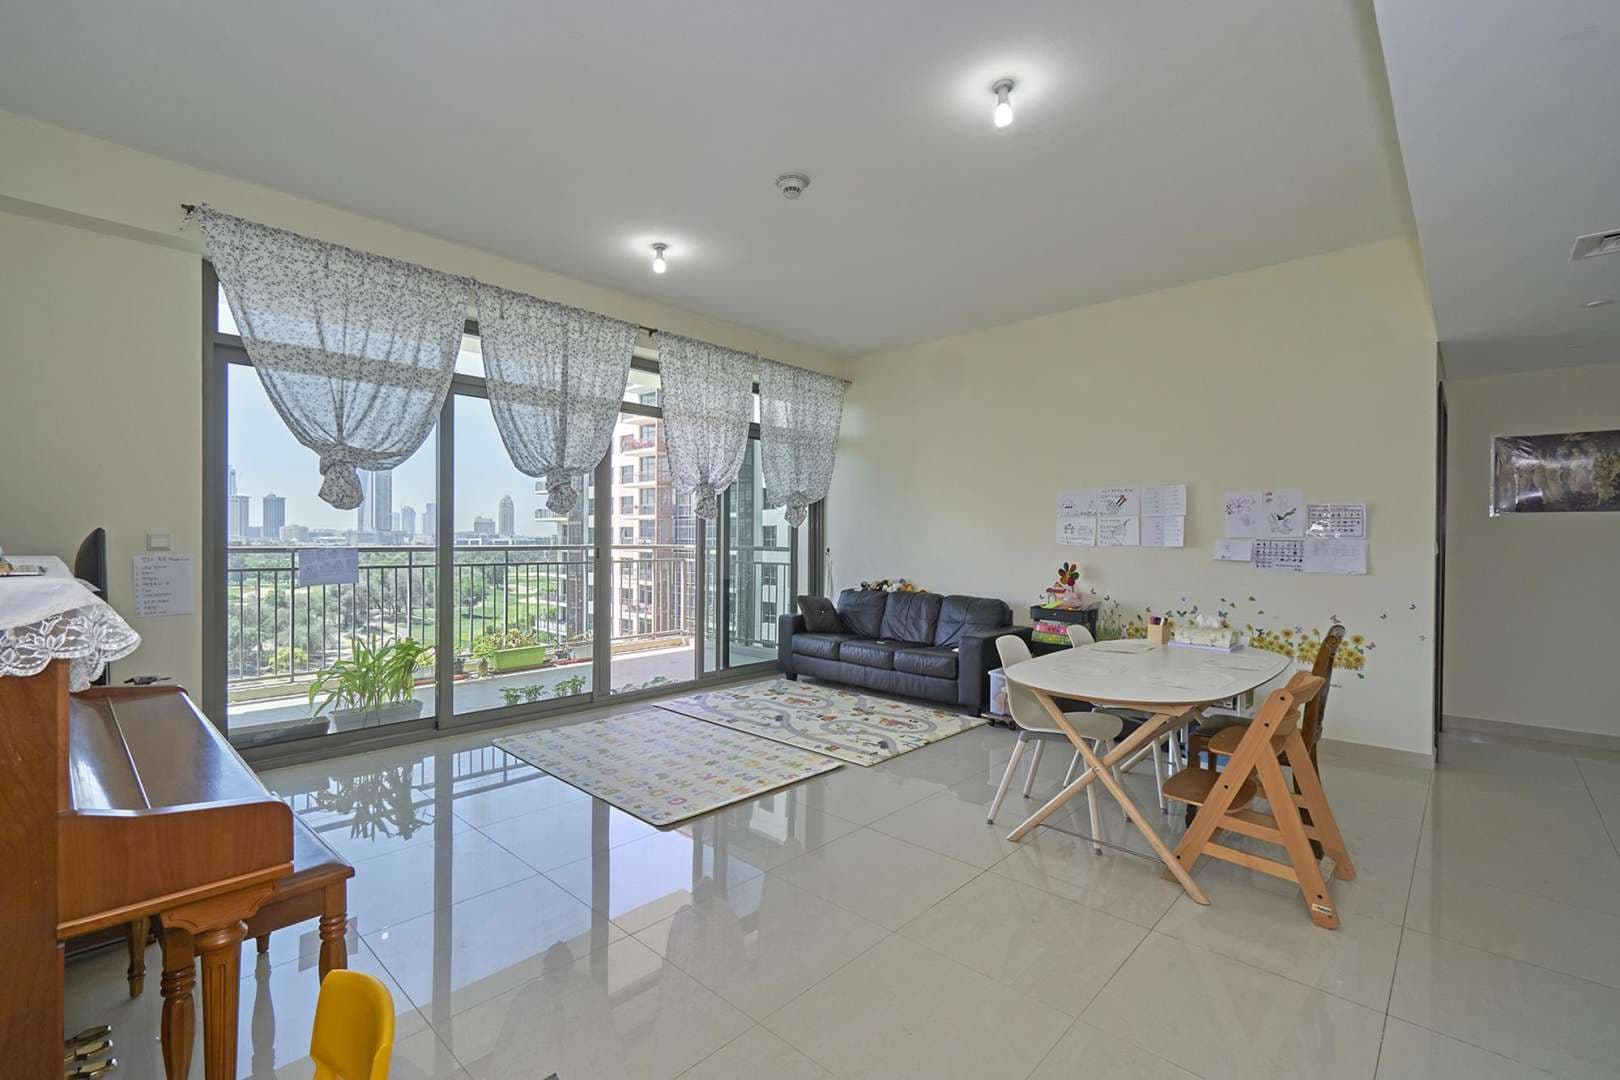 3 Bedroom Apartment For Rent Panorama At The Views Lp06384 1b03fcf05d8f1800.jpg